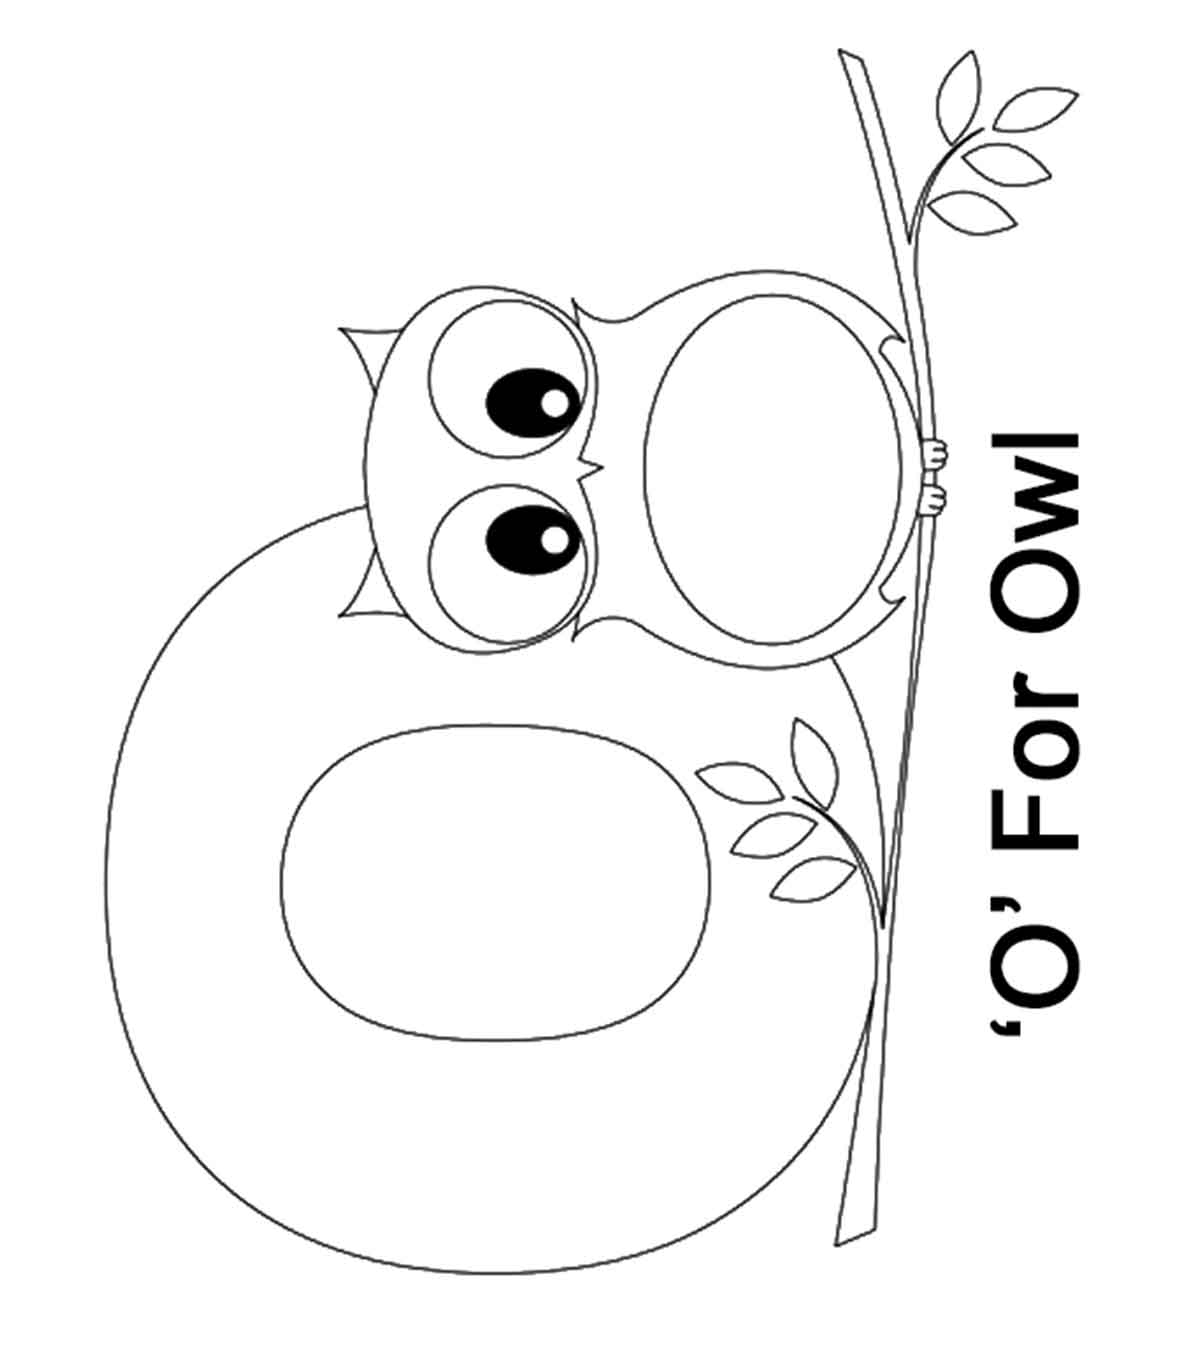 Top 10 Letter ‘O' Coloring Pages Your Toddler Will Love To Learn & Color